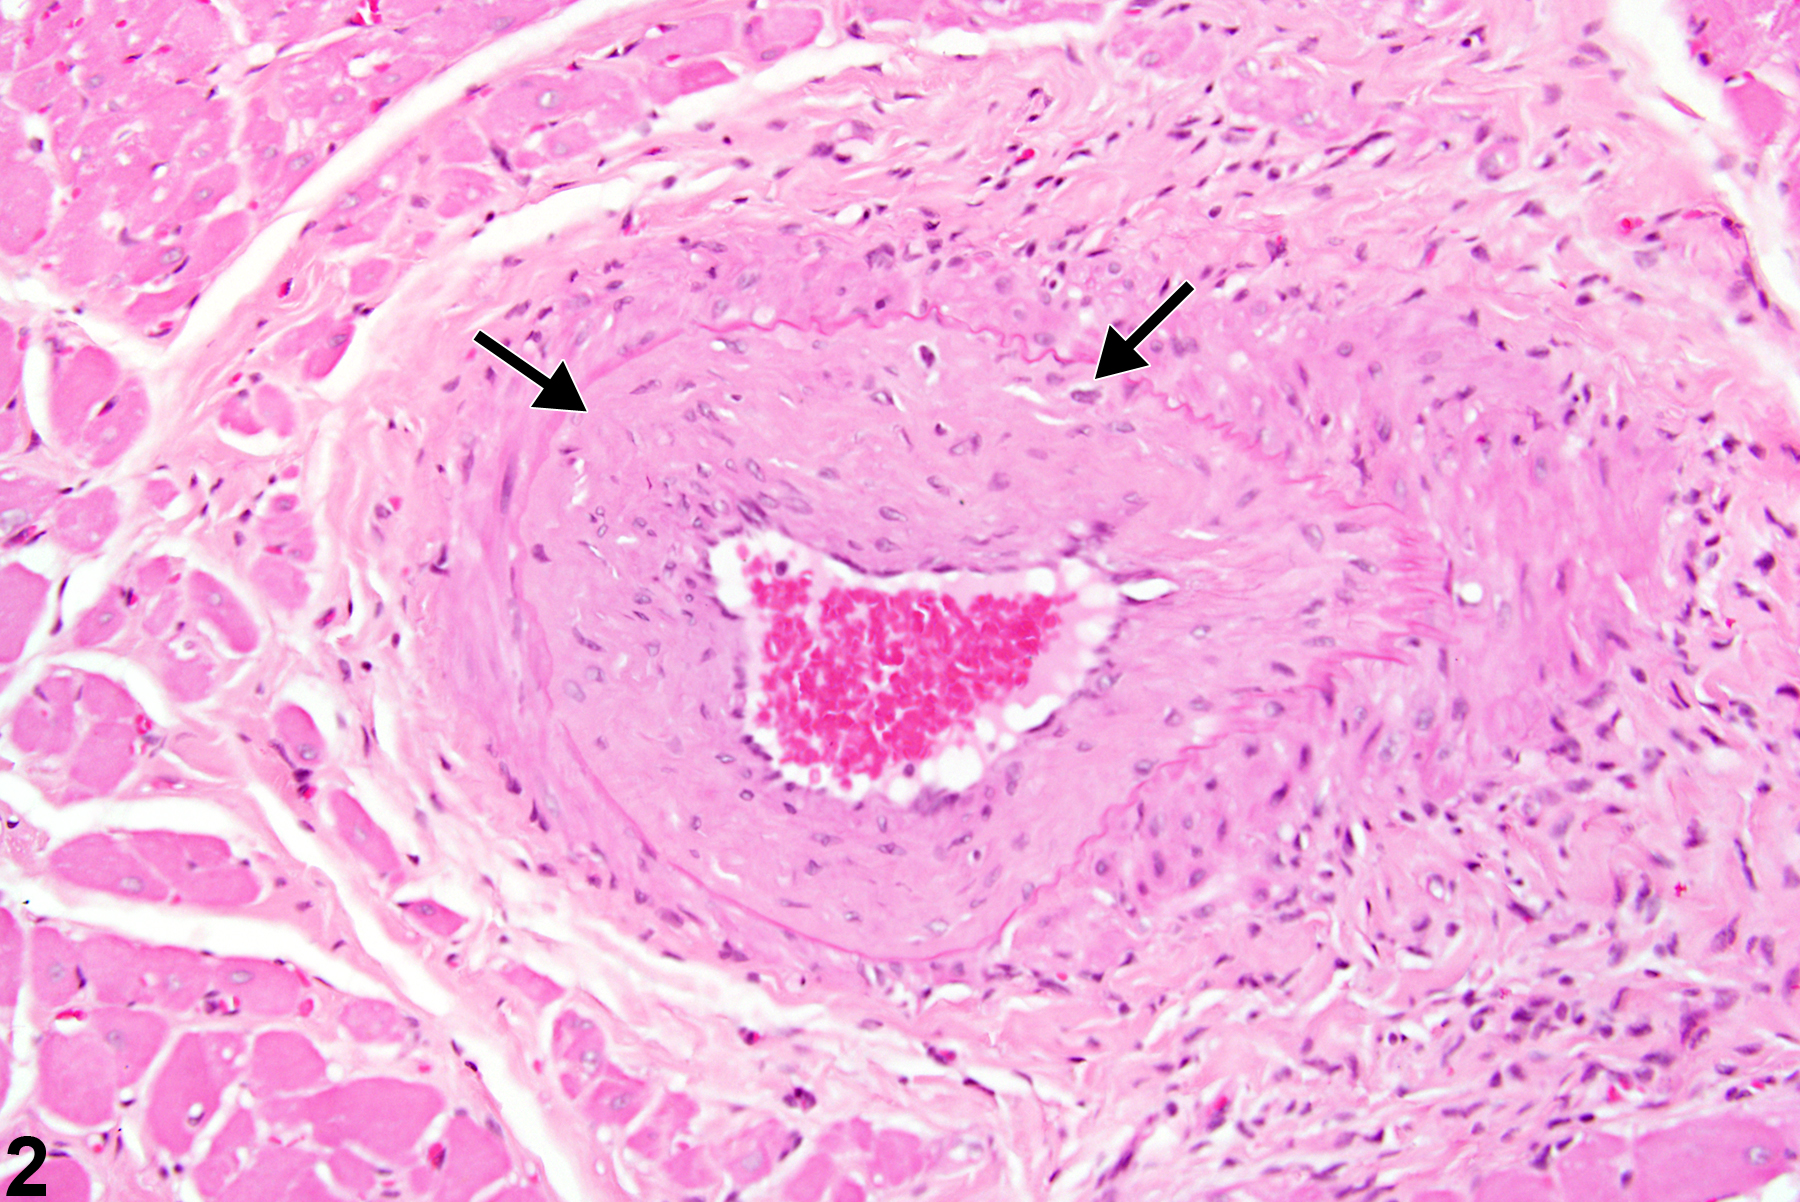 Image of proliferation, intimal in the heart, artery from a male F344/N rat in a chronic study